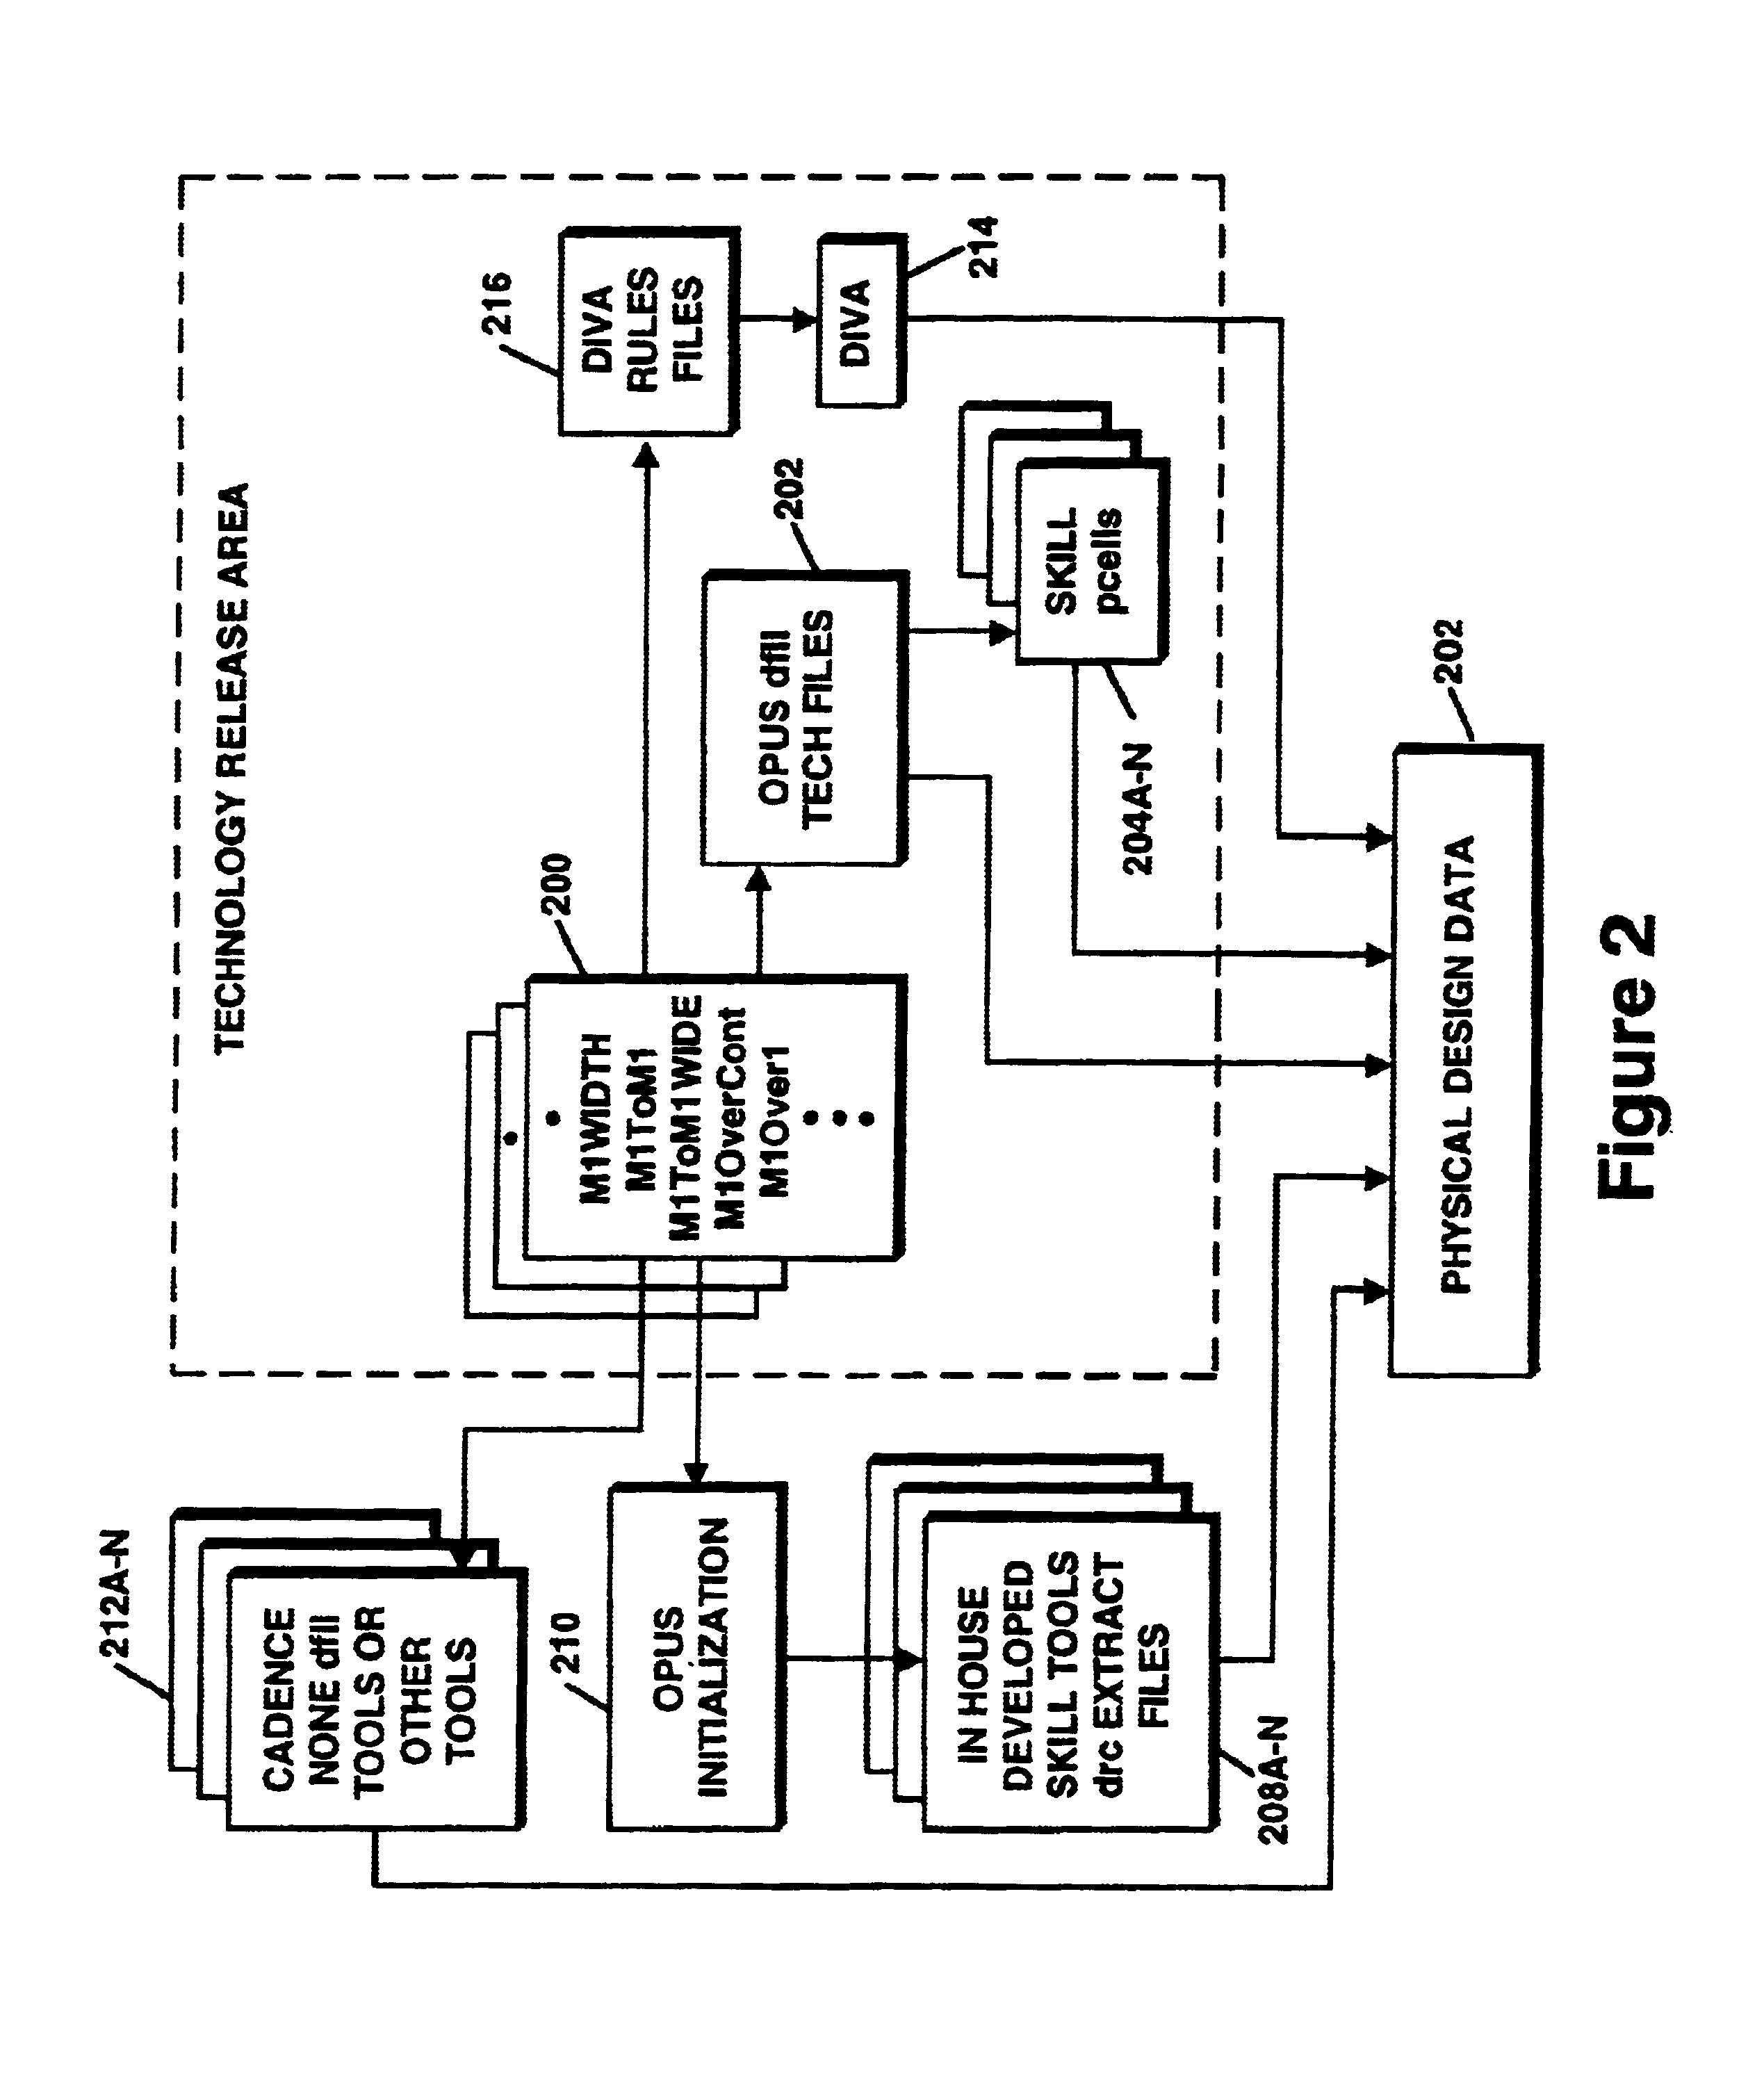 Method and system for ensuring consistency of design rule application in a CAD environment